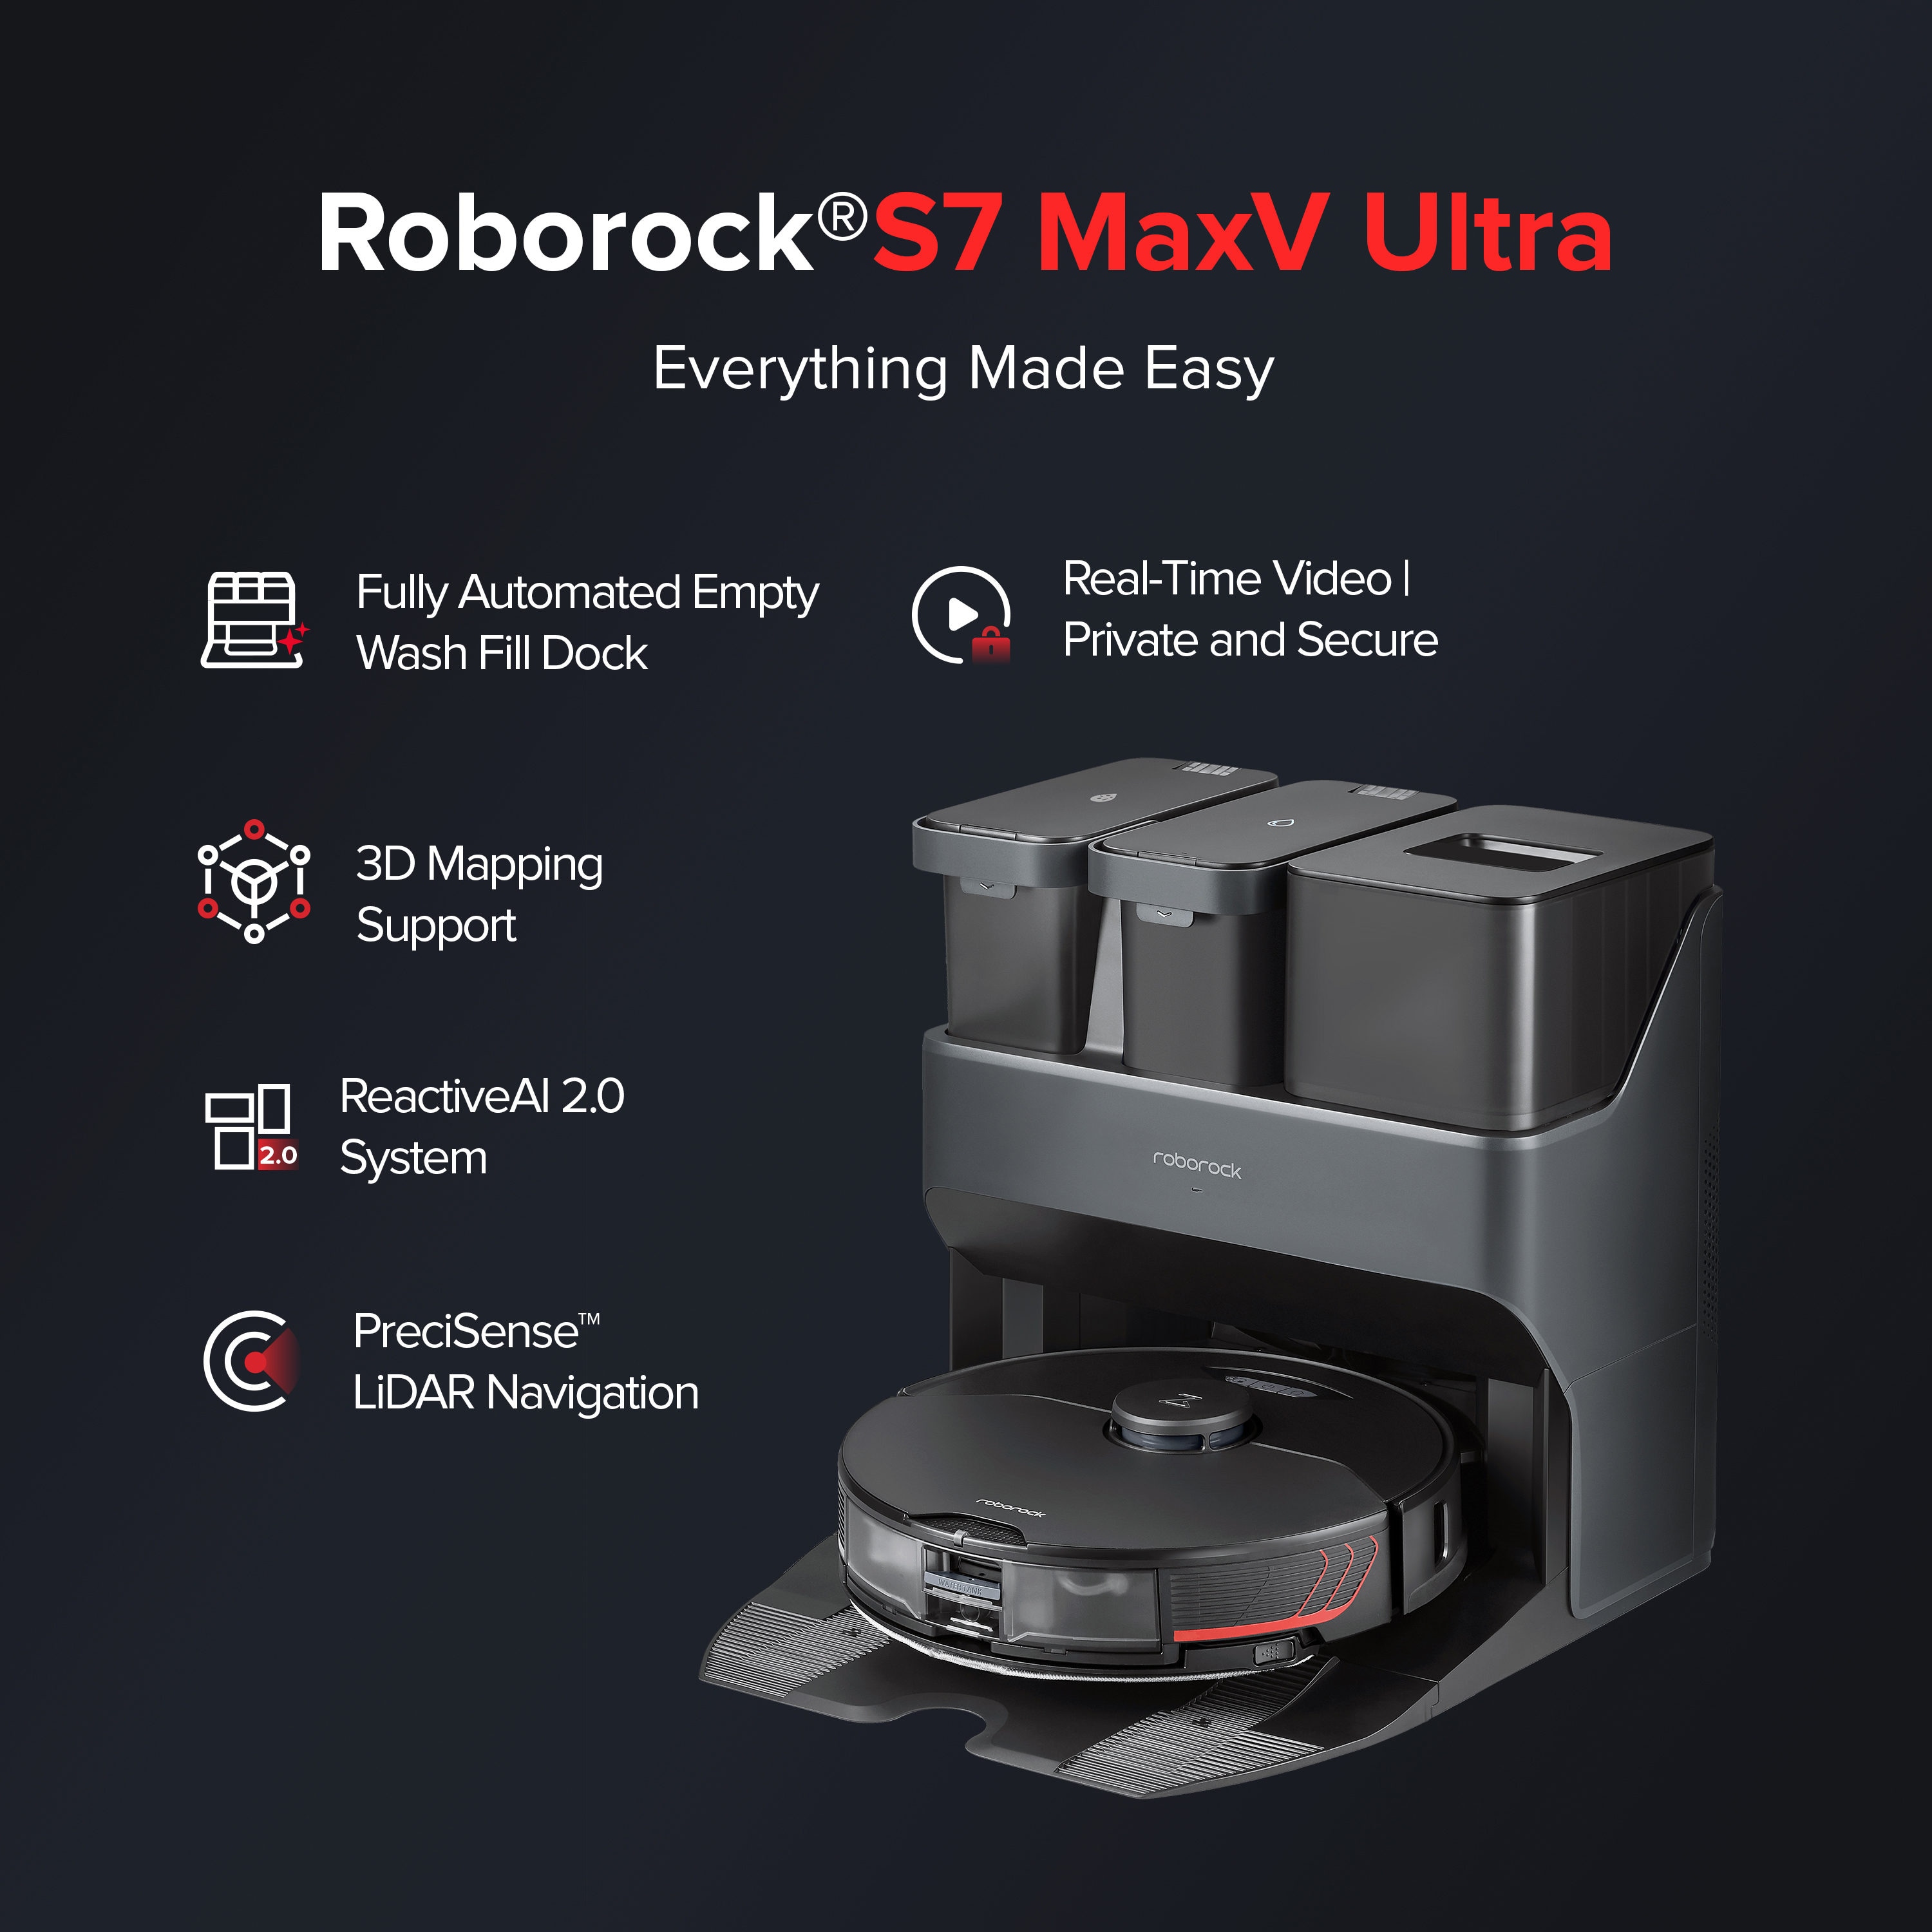  roborock S7 Max Ultra Robot Vacuum and Mop Combo, Auto Mop  Drying/ Washing, Self-Emptying, Self-Refilling, 5500Pa Suction, Reactive  Tech Obstacle Avoidance, Black (RockDock Ultra Series)